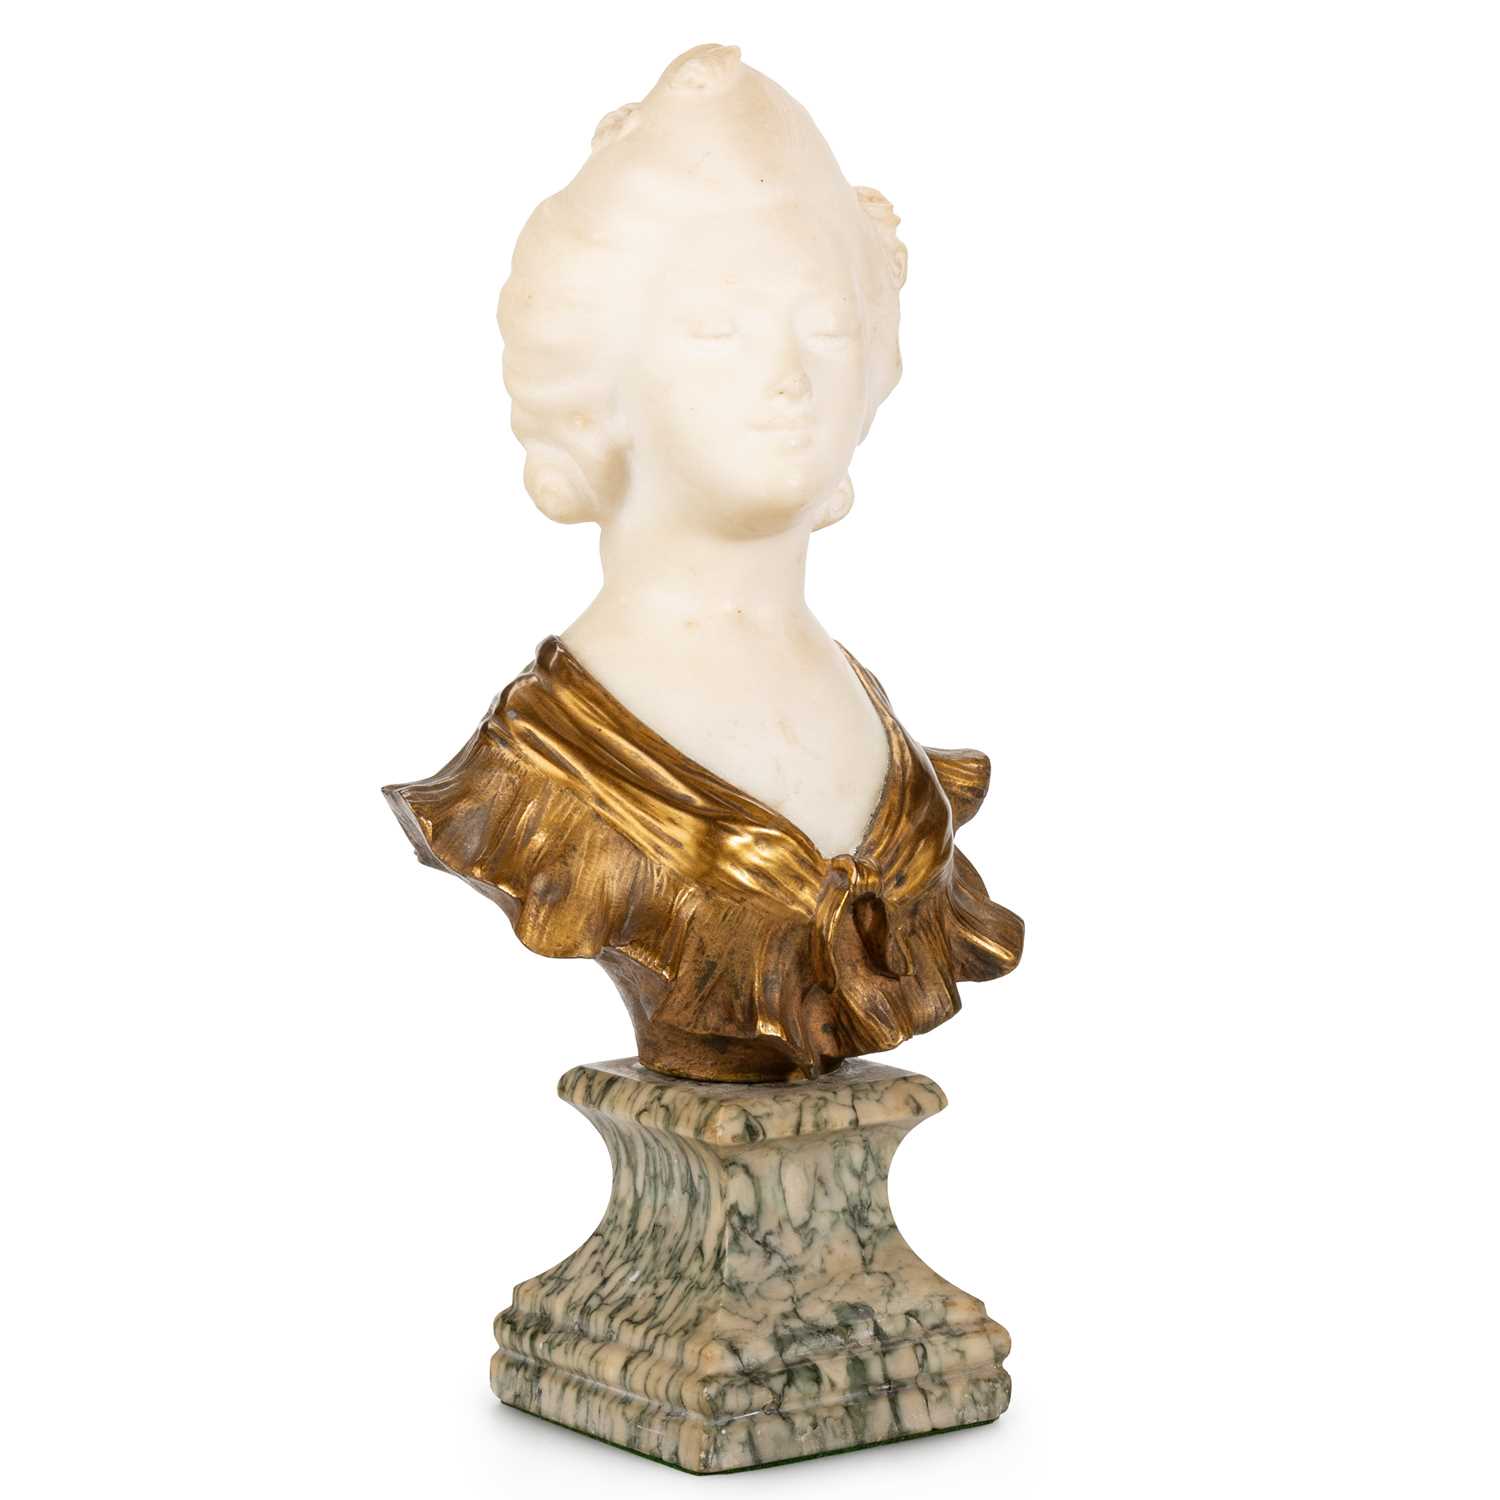 AN ITALIAN ALABASTER AND ORMOLU-MOUNTED BUST OF MARIE-ANTOINETTE